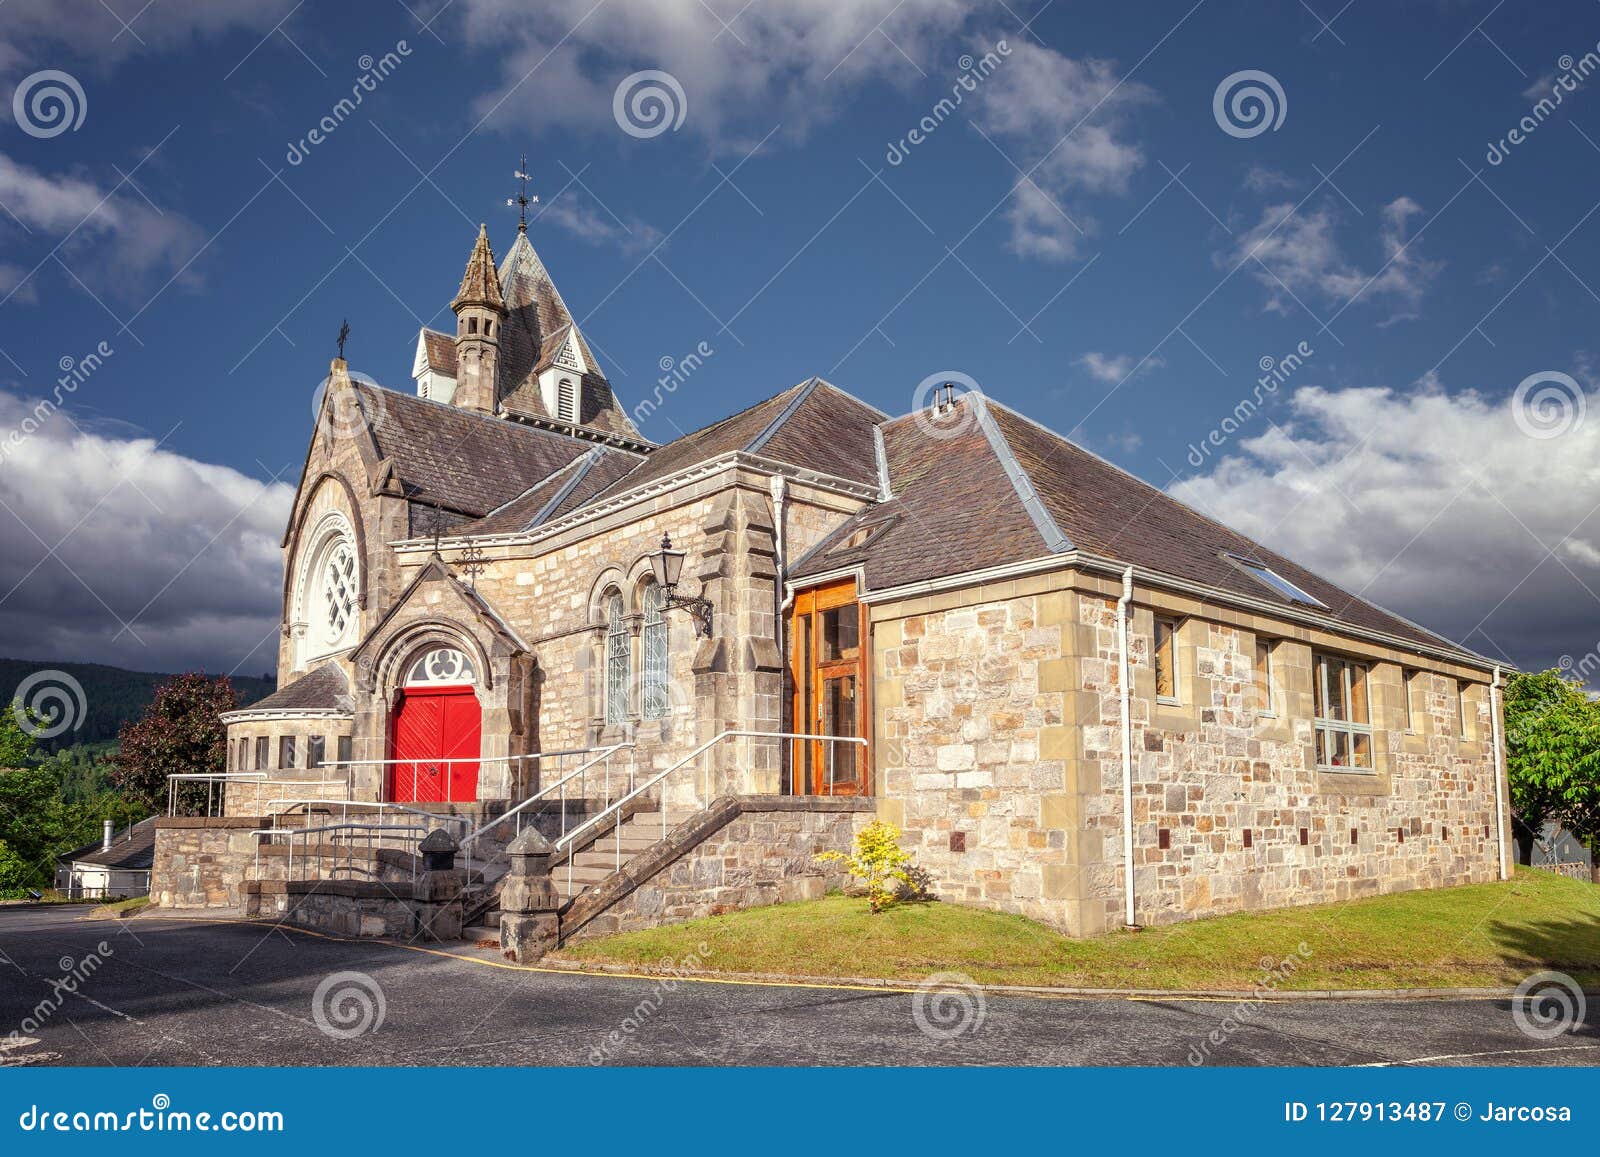 pitlochry church, in the county of perthshire in scotland